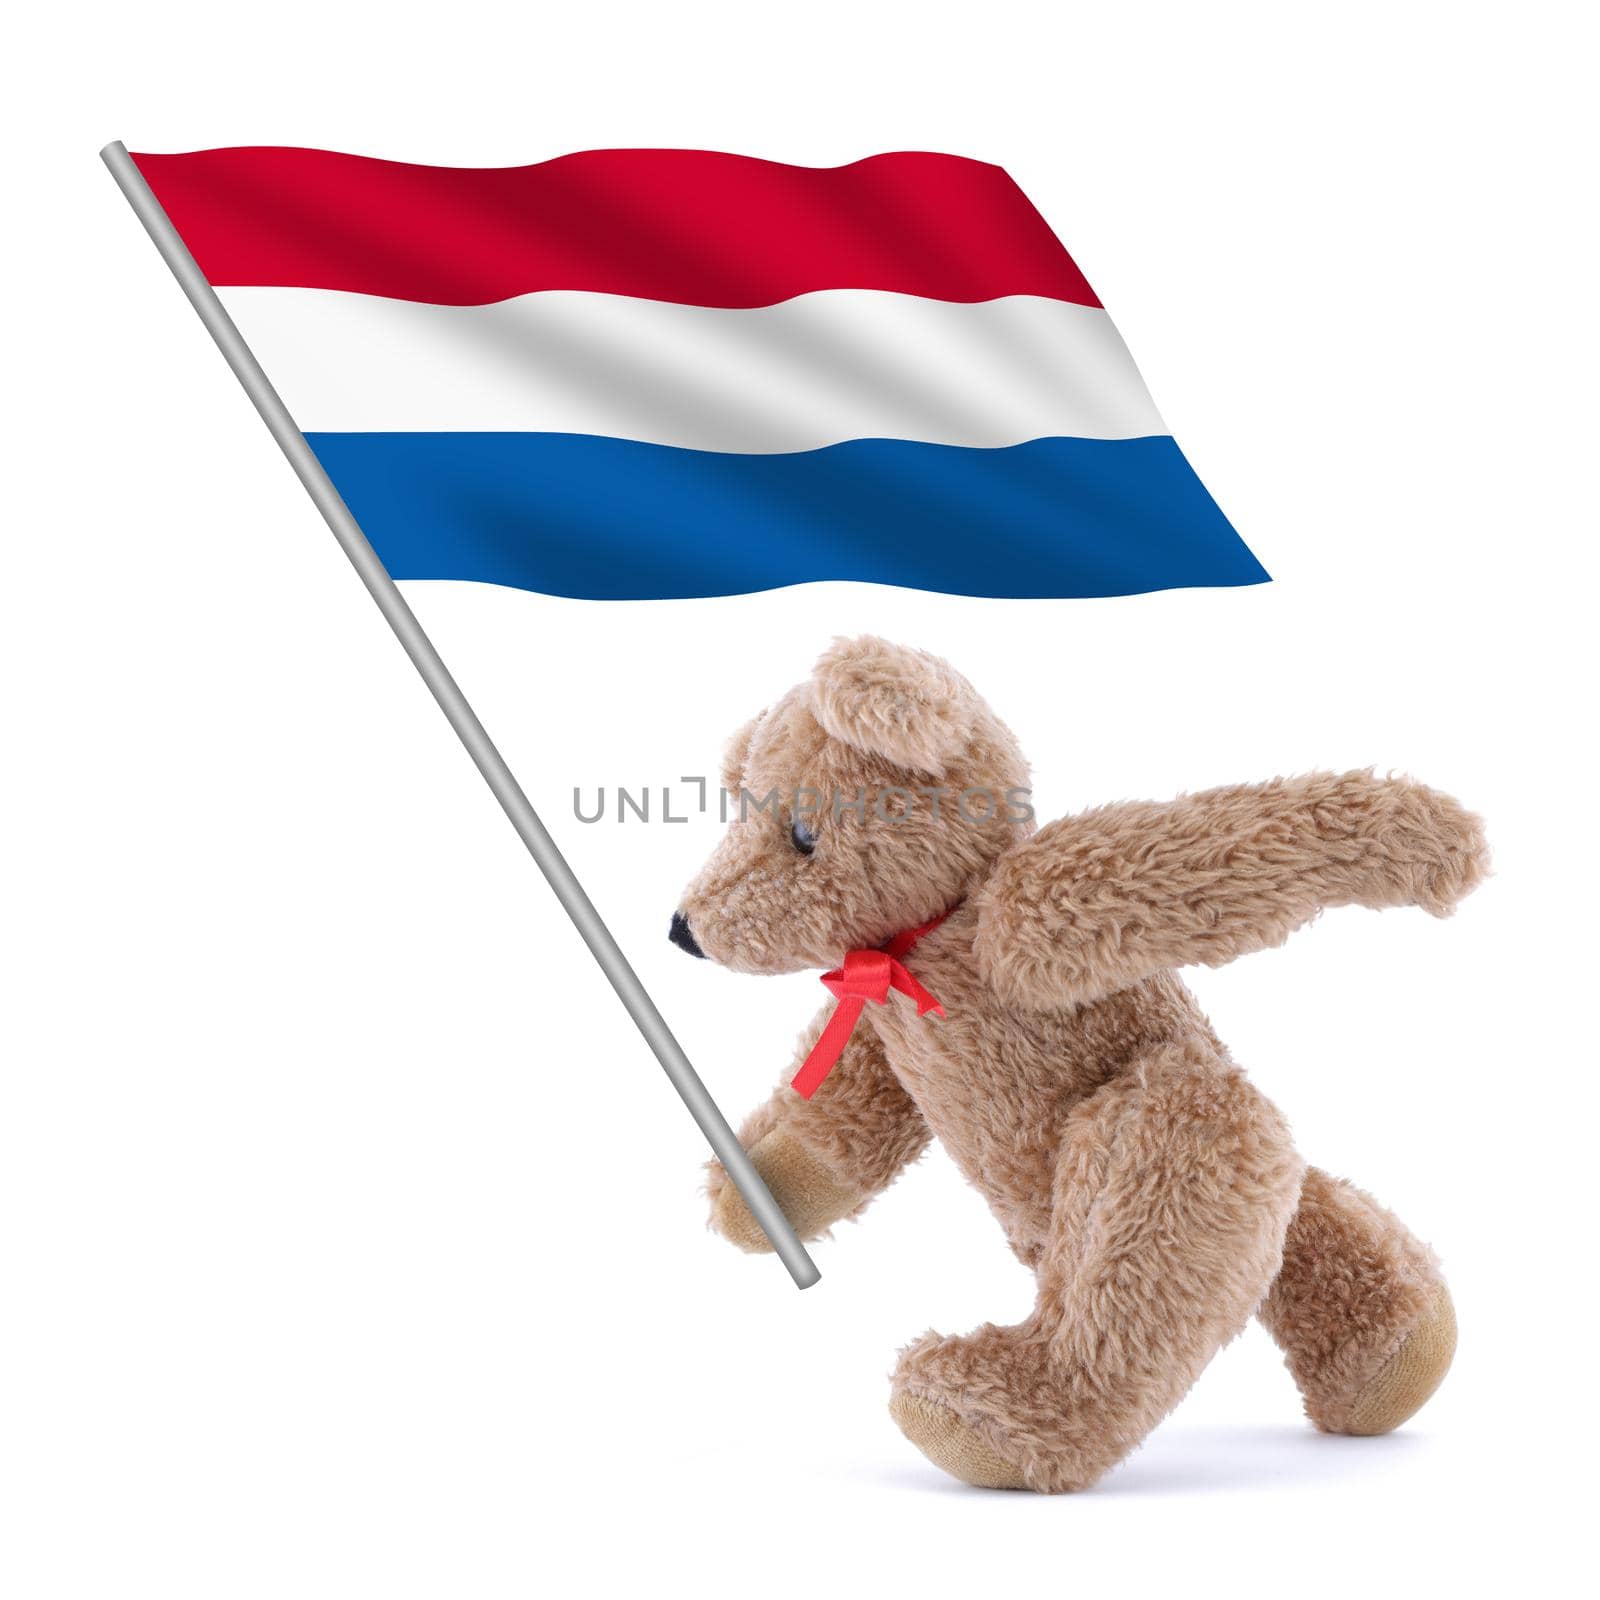 A Netherlands Holland flag being carried by a cute teddy bear